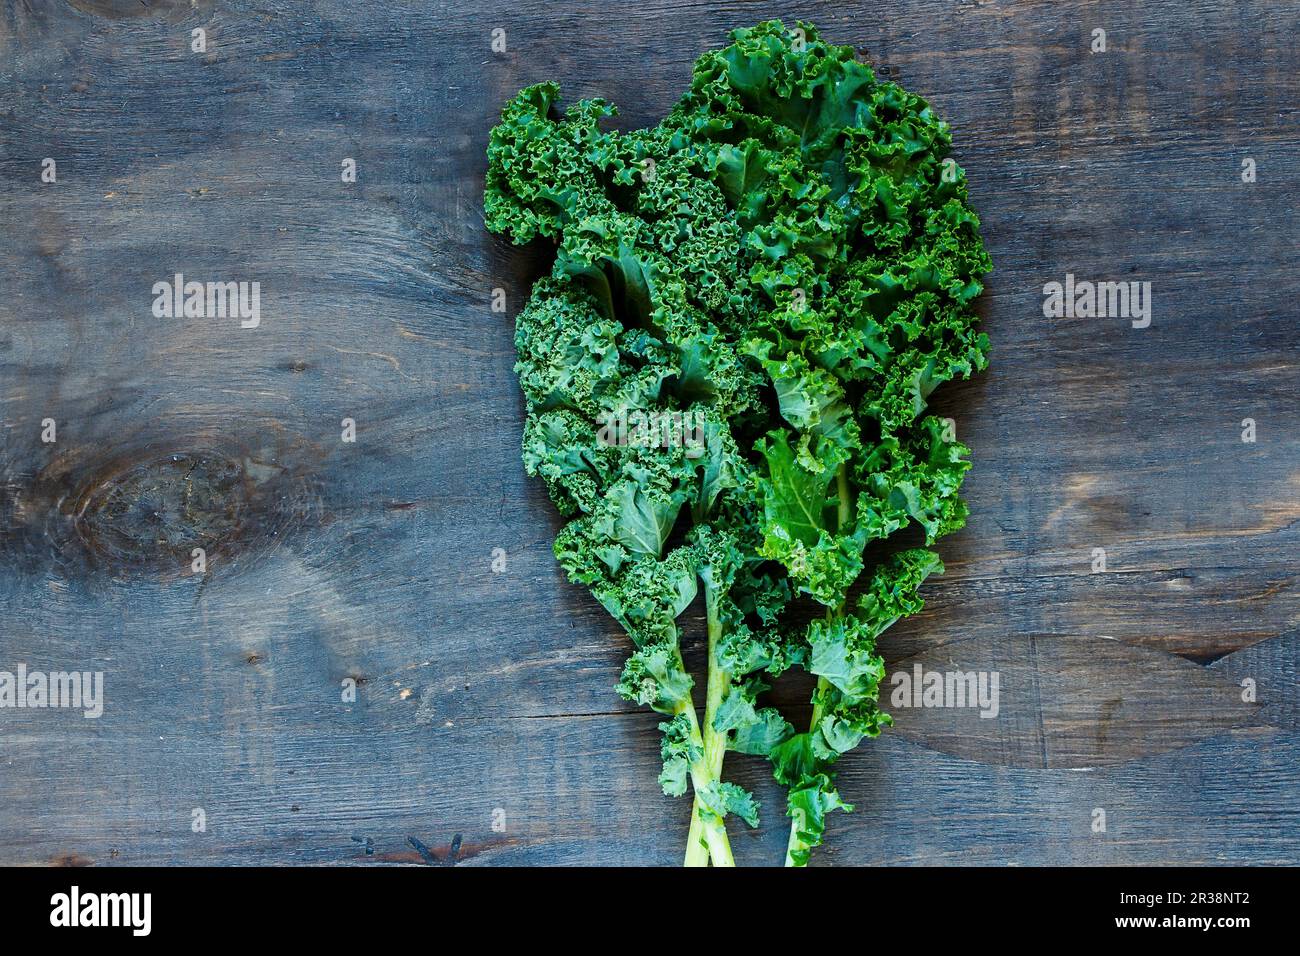 Raw green curly kale on rustic wooden background Stock Photo